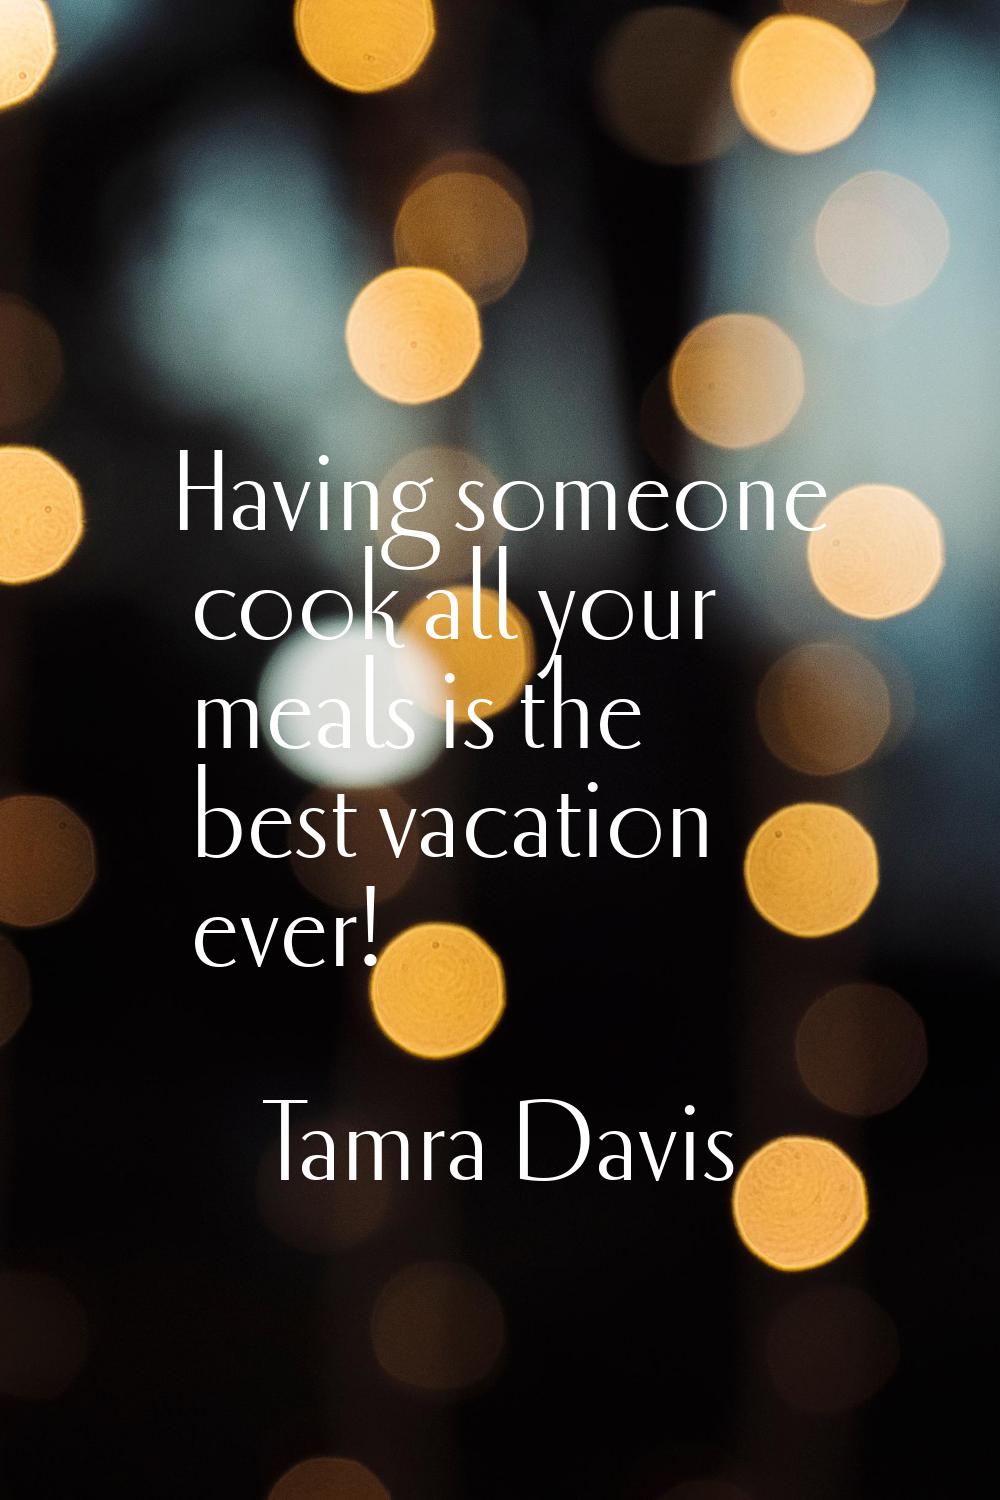 Having someone cook all your meals is the best vacation ever!